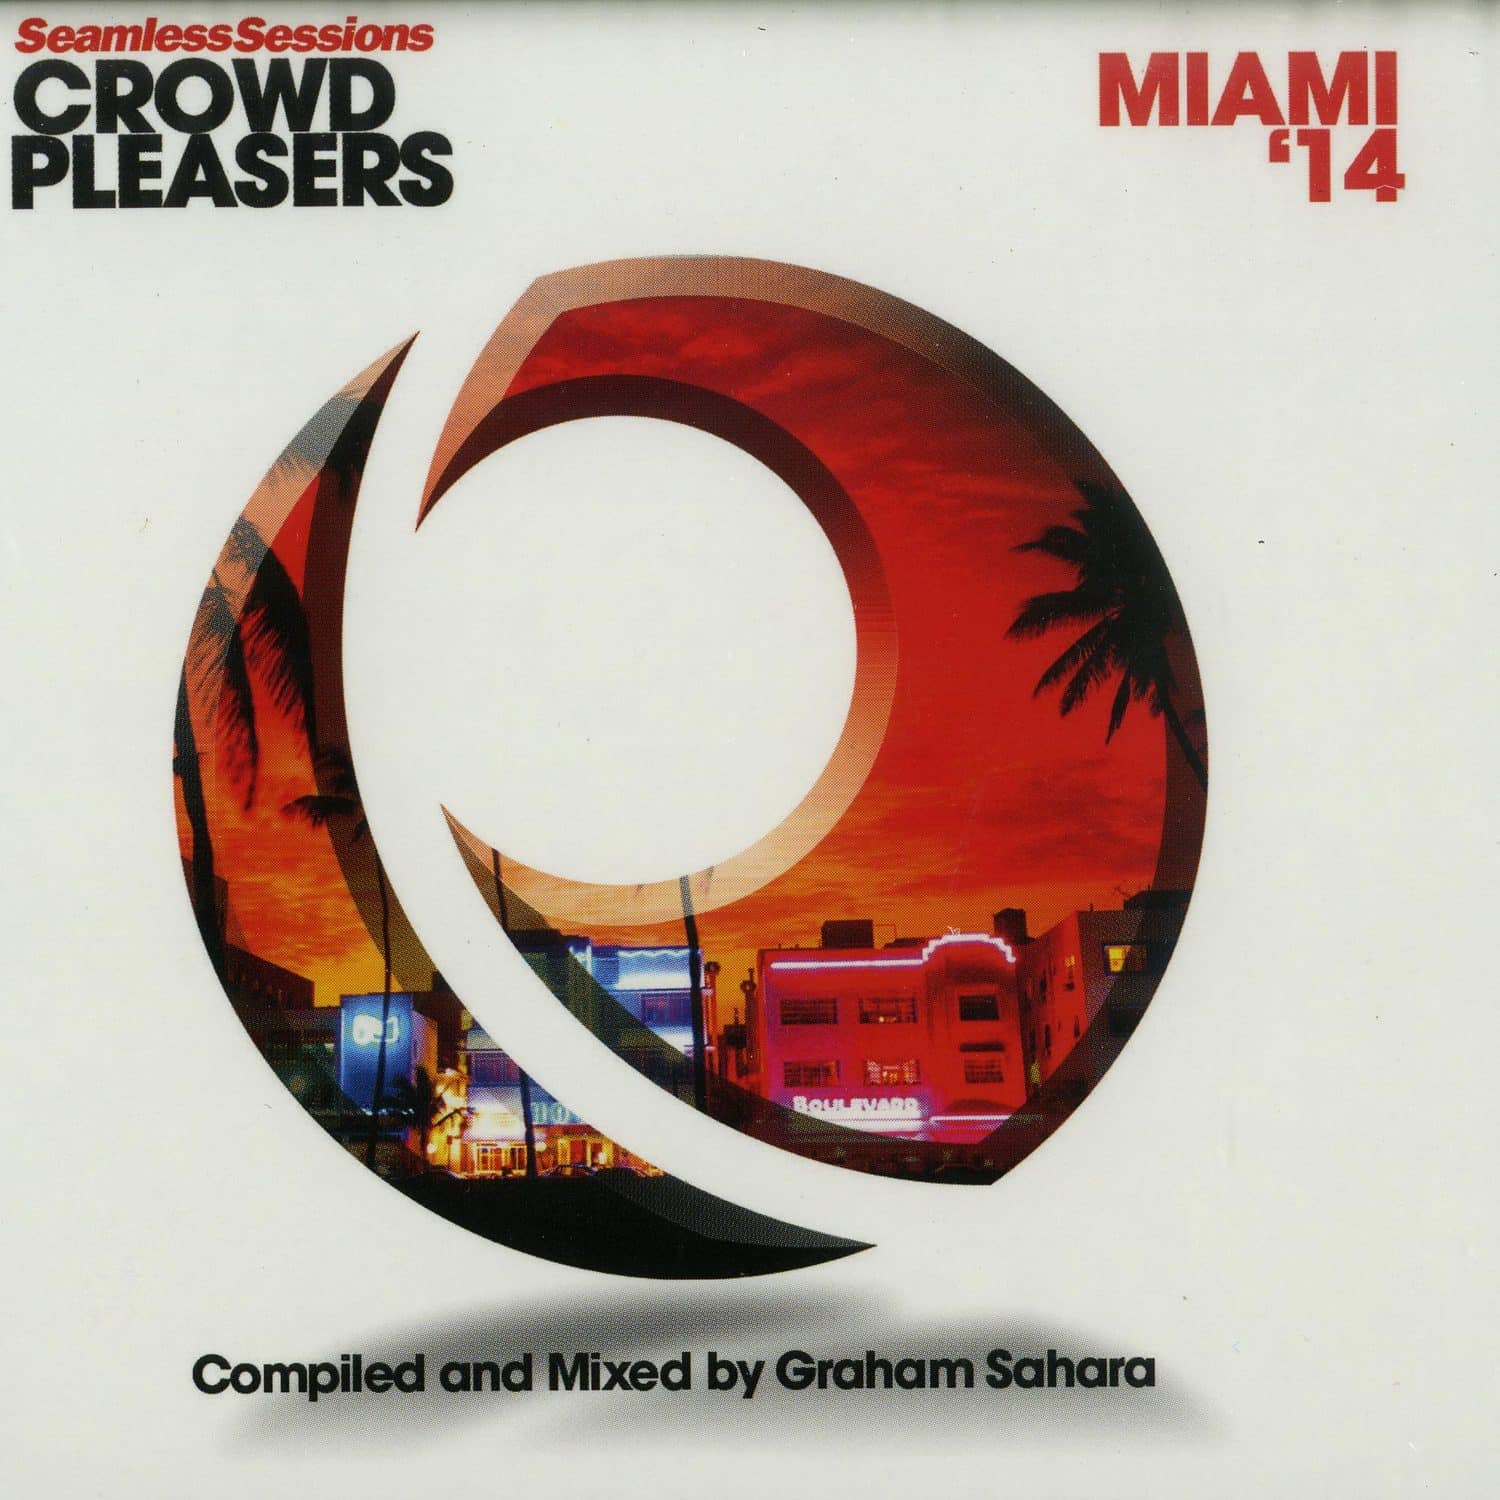 Seamless Sessions - CROWD PLEASERS MIAMI 14 